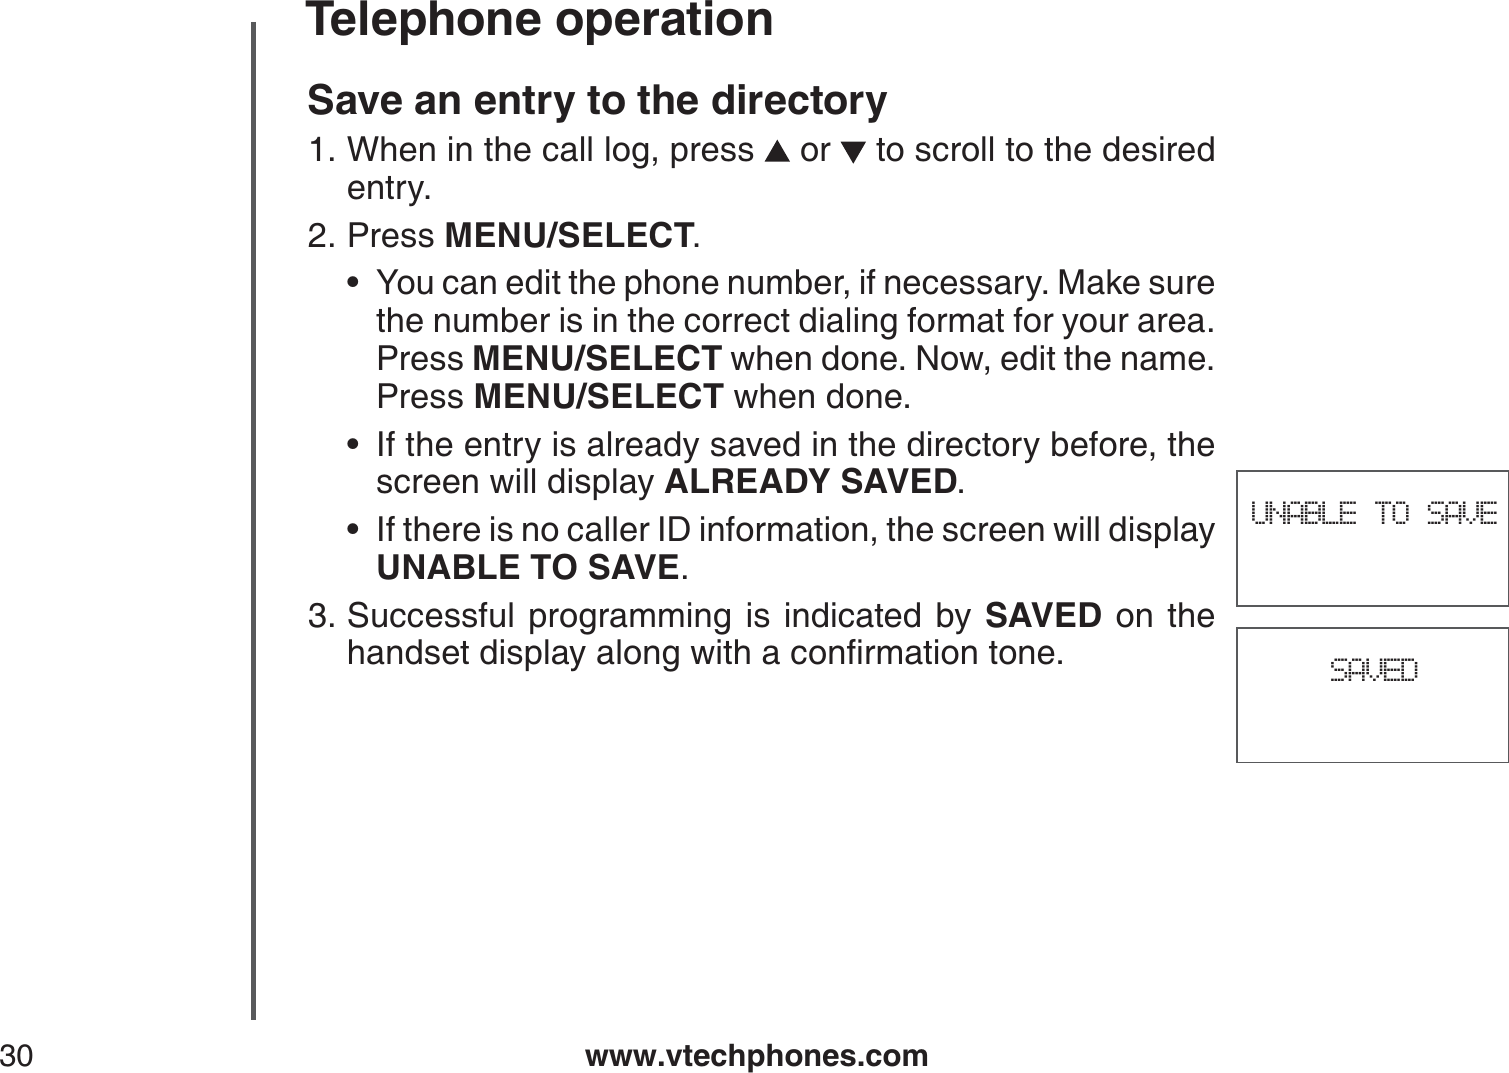 www.vtechphones.com30Telephone operationSAVEDUNABLE TO SAVESave an entry to the directoryWhen in the call log, press   or   to scroll to the desired entry.Press MENU/SELECT.You can edit the phone number, if necessary. Make sure the number is in the correct dialing format for your area. Press MENU/SELECT when done. Now, edit the name. Press MENU/SELECT when done.If the entry is already saved in the directory before, the screen will display ALREADY SAVED.If there is no caller ID information, the screen will display UNABLE TO SAVE.Successful programming is indicated by SAVED on the JCPFUGVFKURNC[CNQPIYKVJCEQPſTOCVKQPVQPG1.2.•••3.